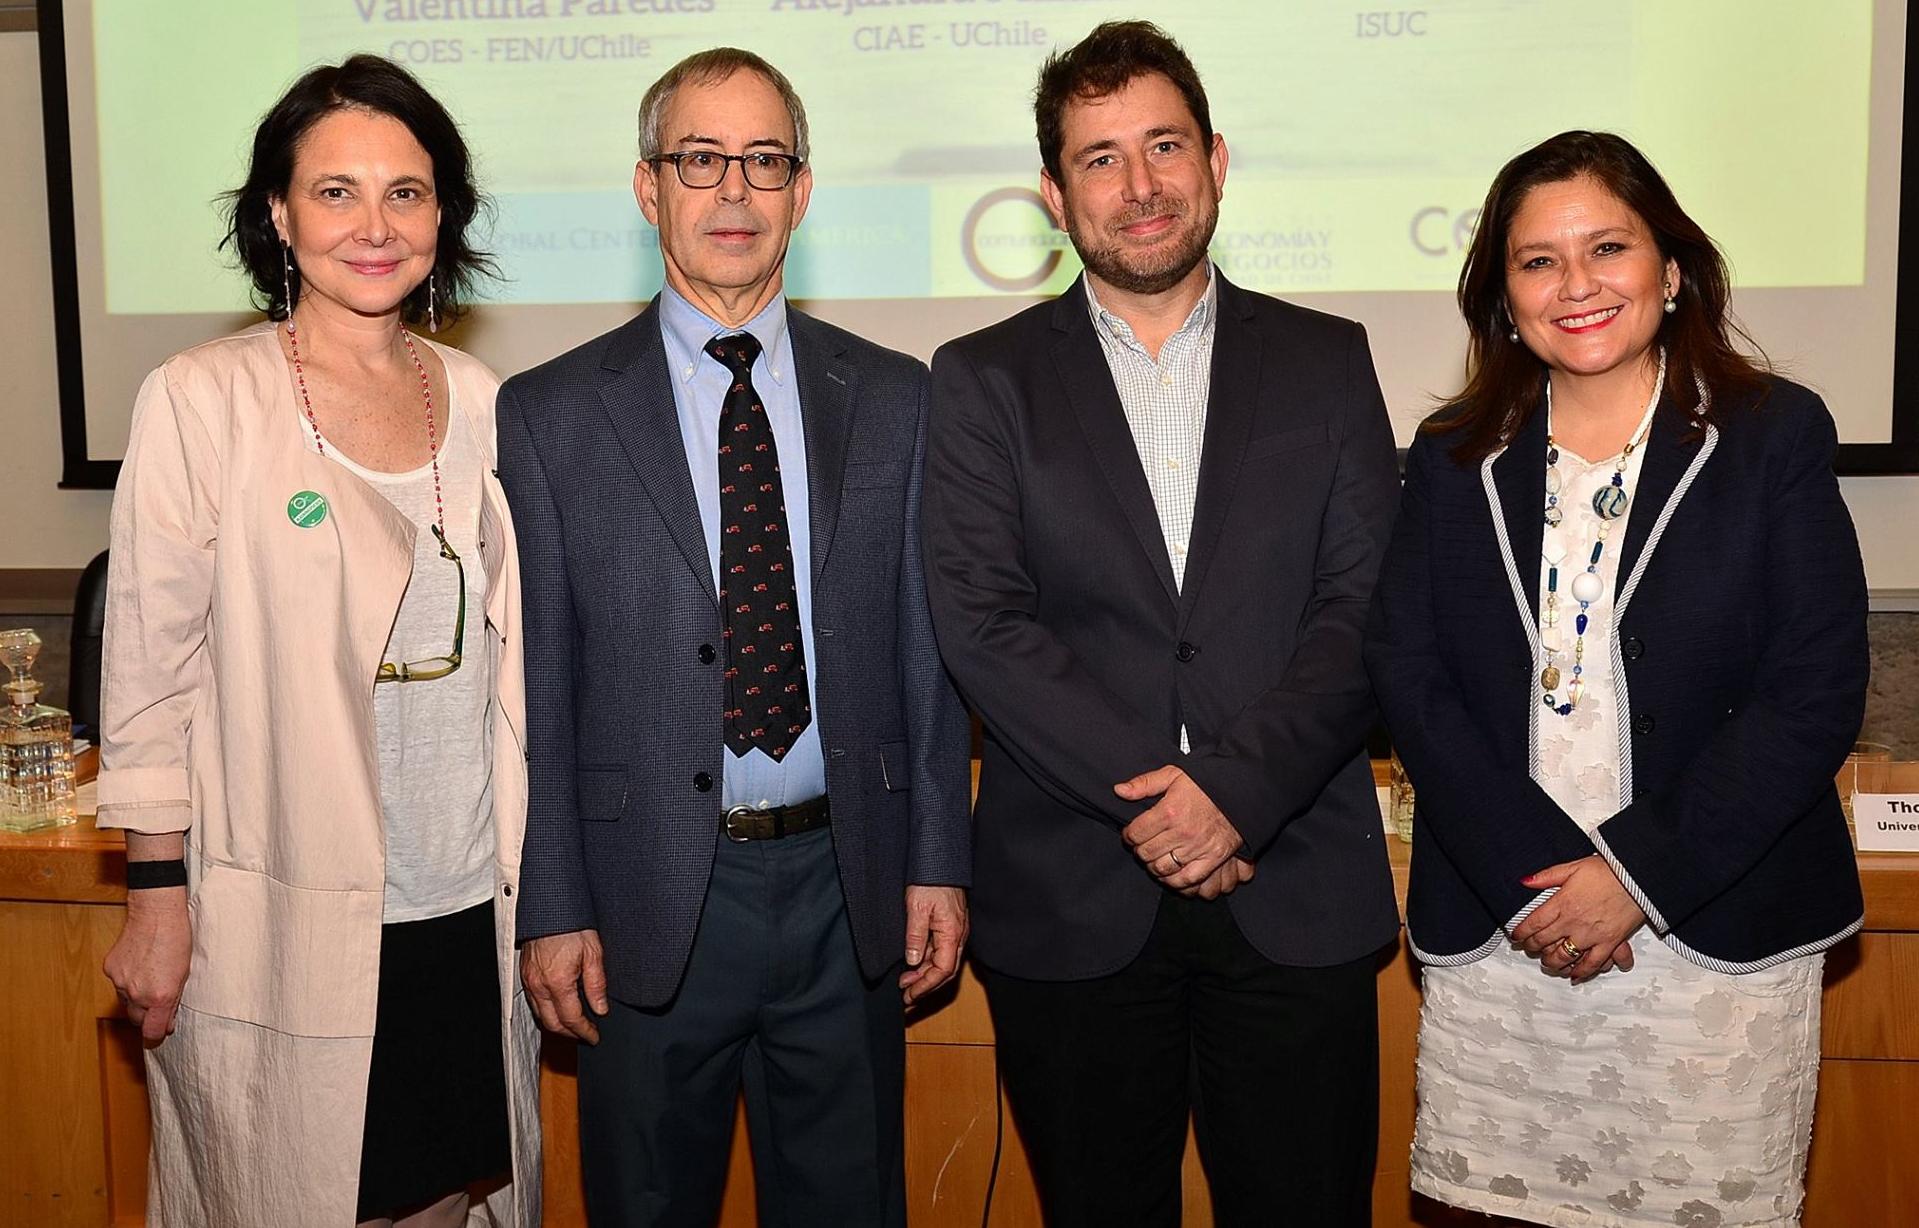 Karen Poniachik (Santiago Global Centers Director), Thomas DiPrete ( Giddins Professor of Sociology, and Co-Director, Institute for Social and Economic Research and Policy at Columbia University) Daniel Hojman (COES) y Alejandra Sepúlveda (ComunidadMujer).